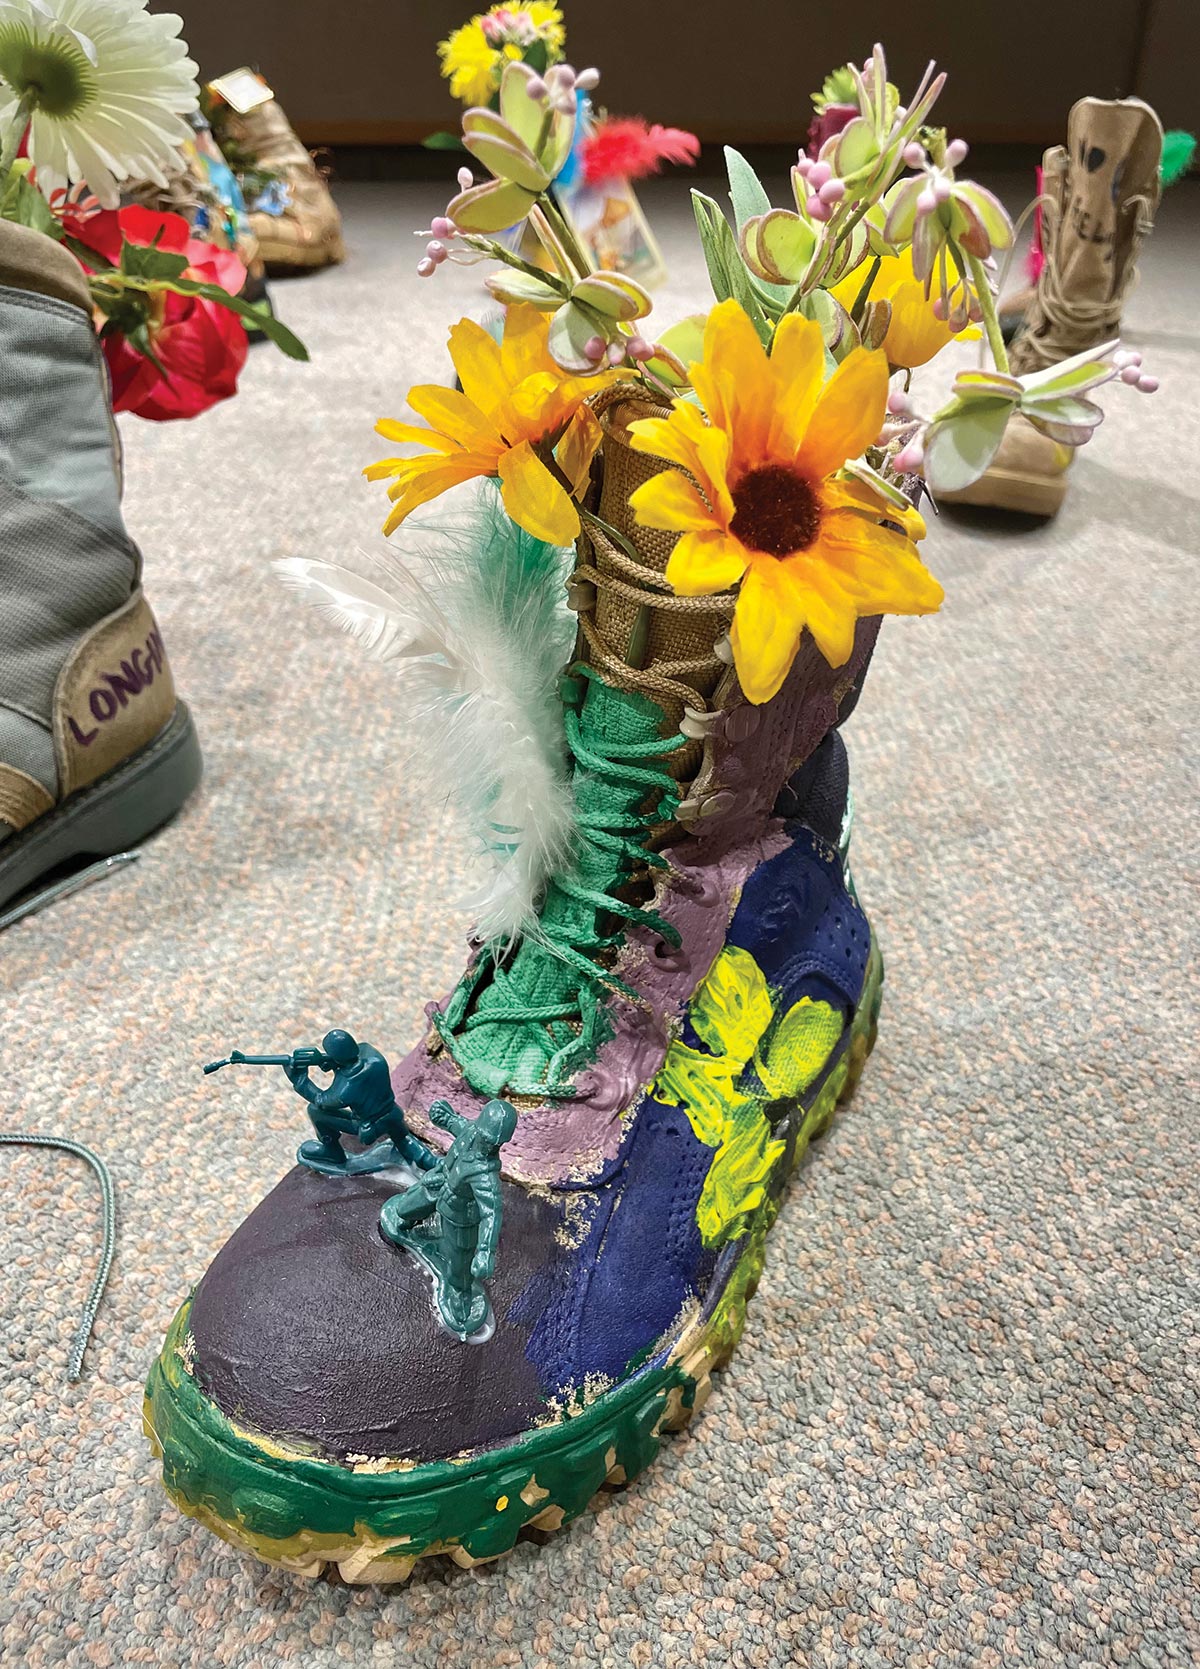 “A Walk in our Boots” on display at Fairbanks Arts Association’s Bear Gallery in May for the exhibition Forget-me-not: Art Therapy with Alaska’s Military Population, curated by art therapist Alexis Castriotta